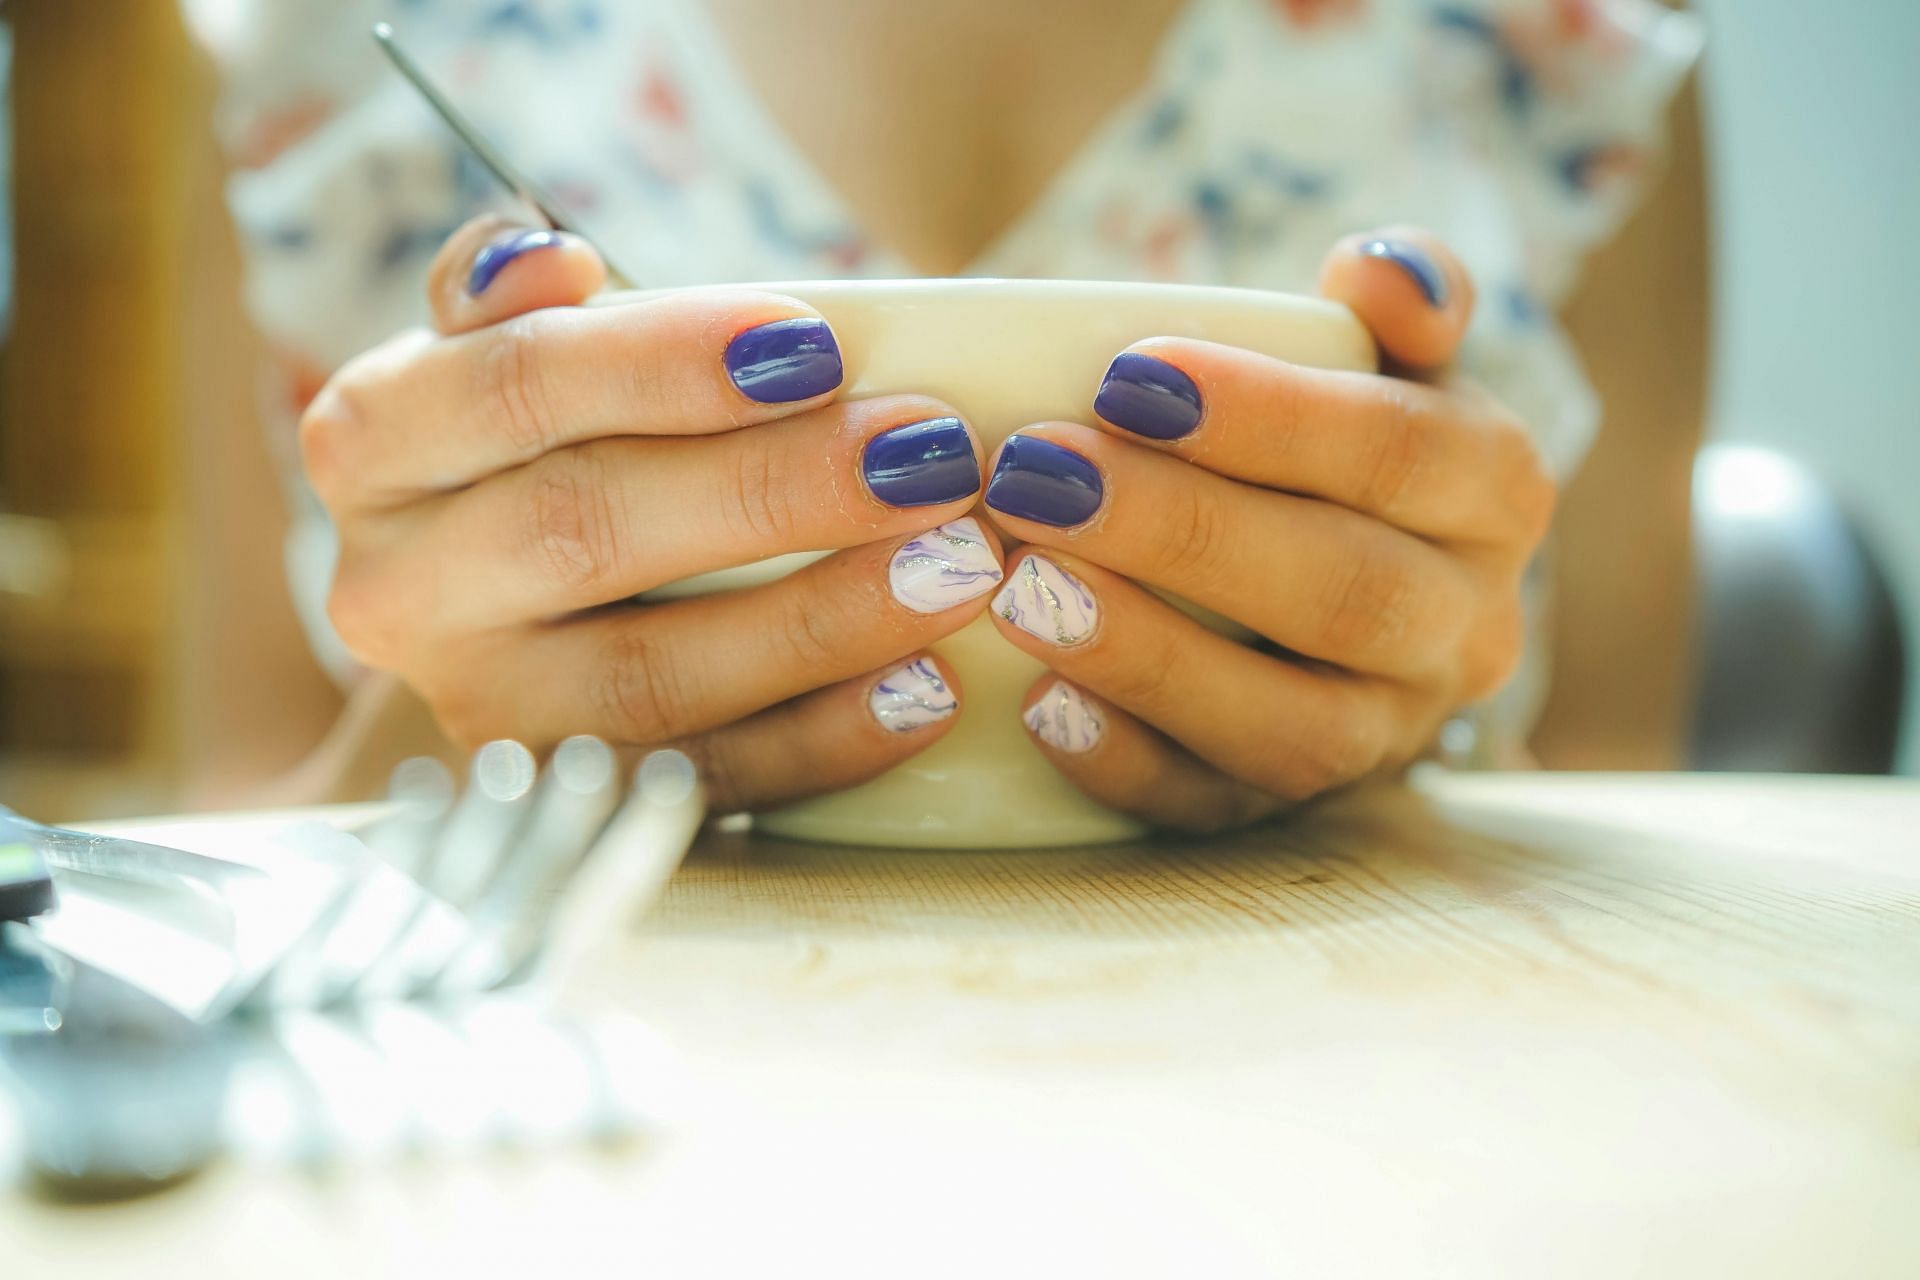 tips to stop picking nails (image sourced via Pexels / Photo by nikita)